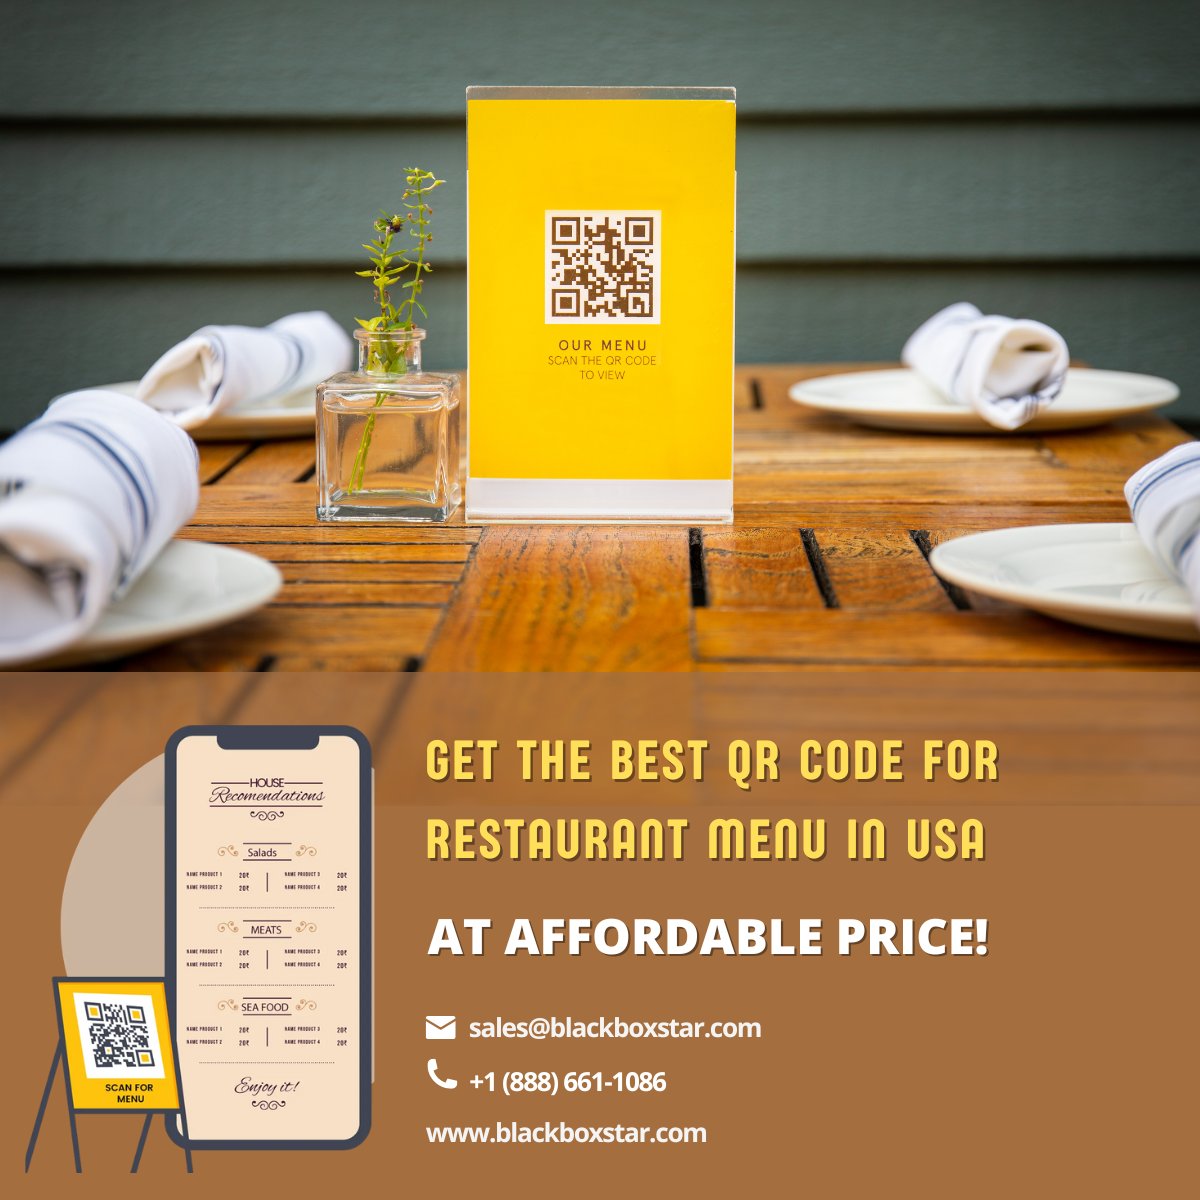 Transform your restaurant experience with a cutting-edge QR code menu from Black Box Star! Engage customers instantly and receive authentic reviews. Elevate your dining game today! Visit blackboxstar.com #QRcodeforRestaurantMenu #DigitalMenu #CustomerExperience